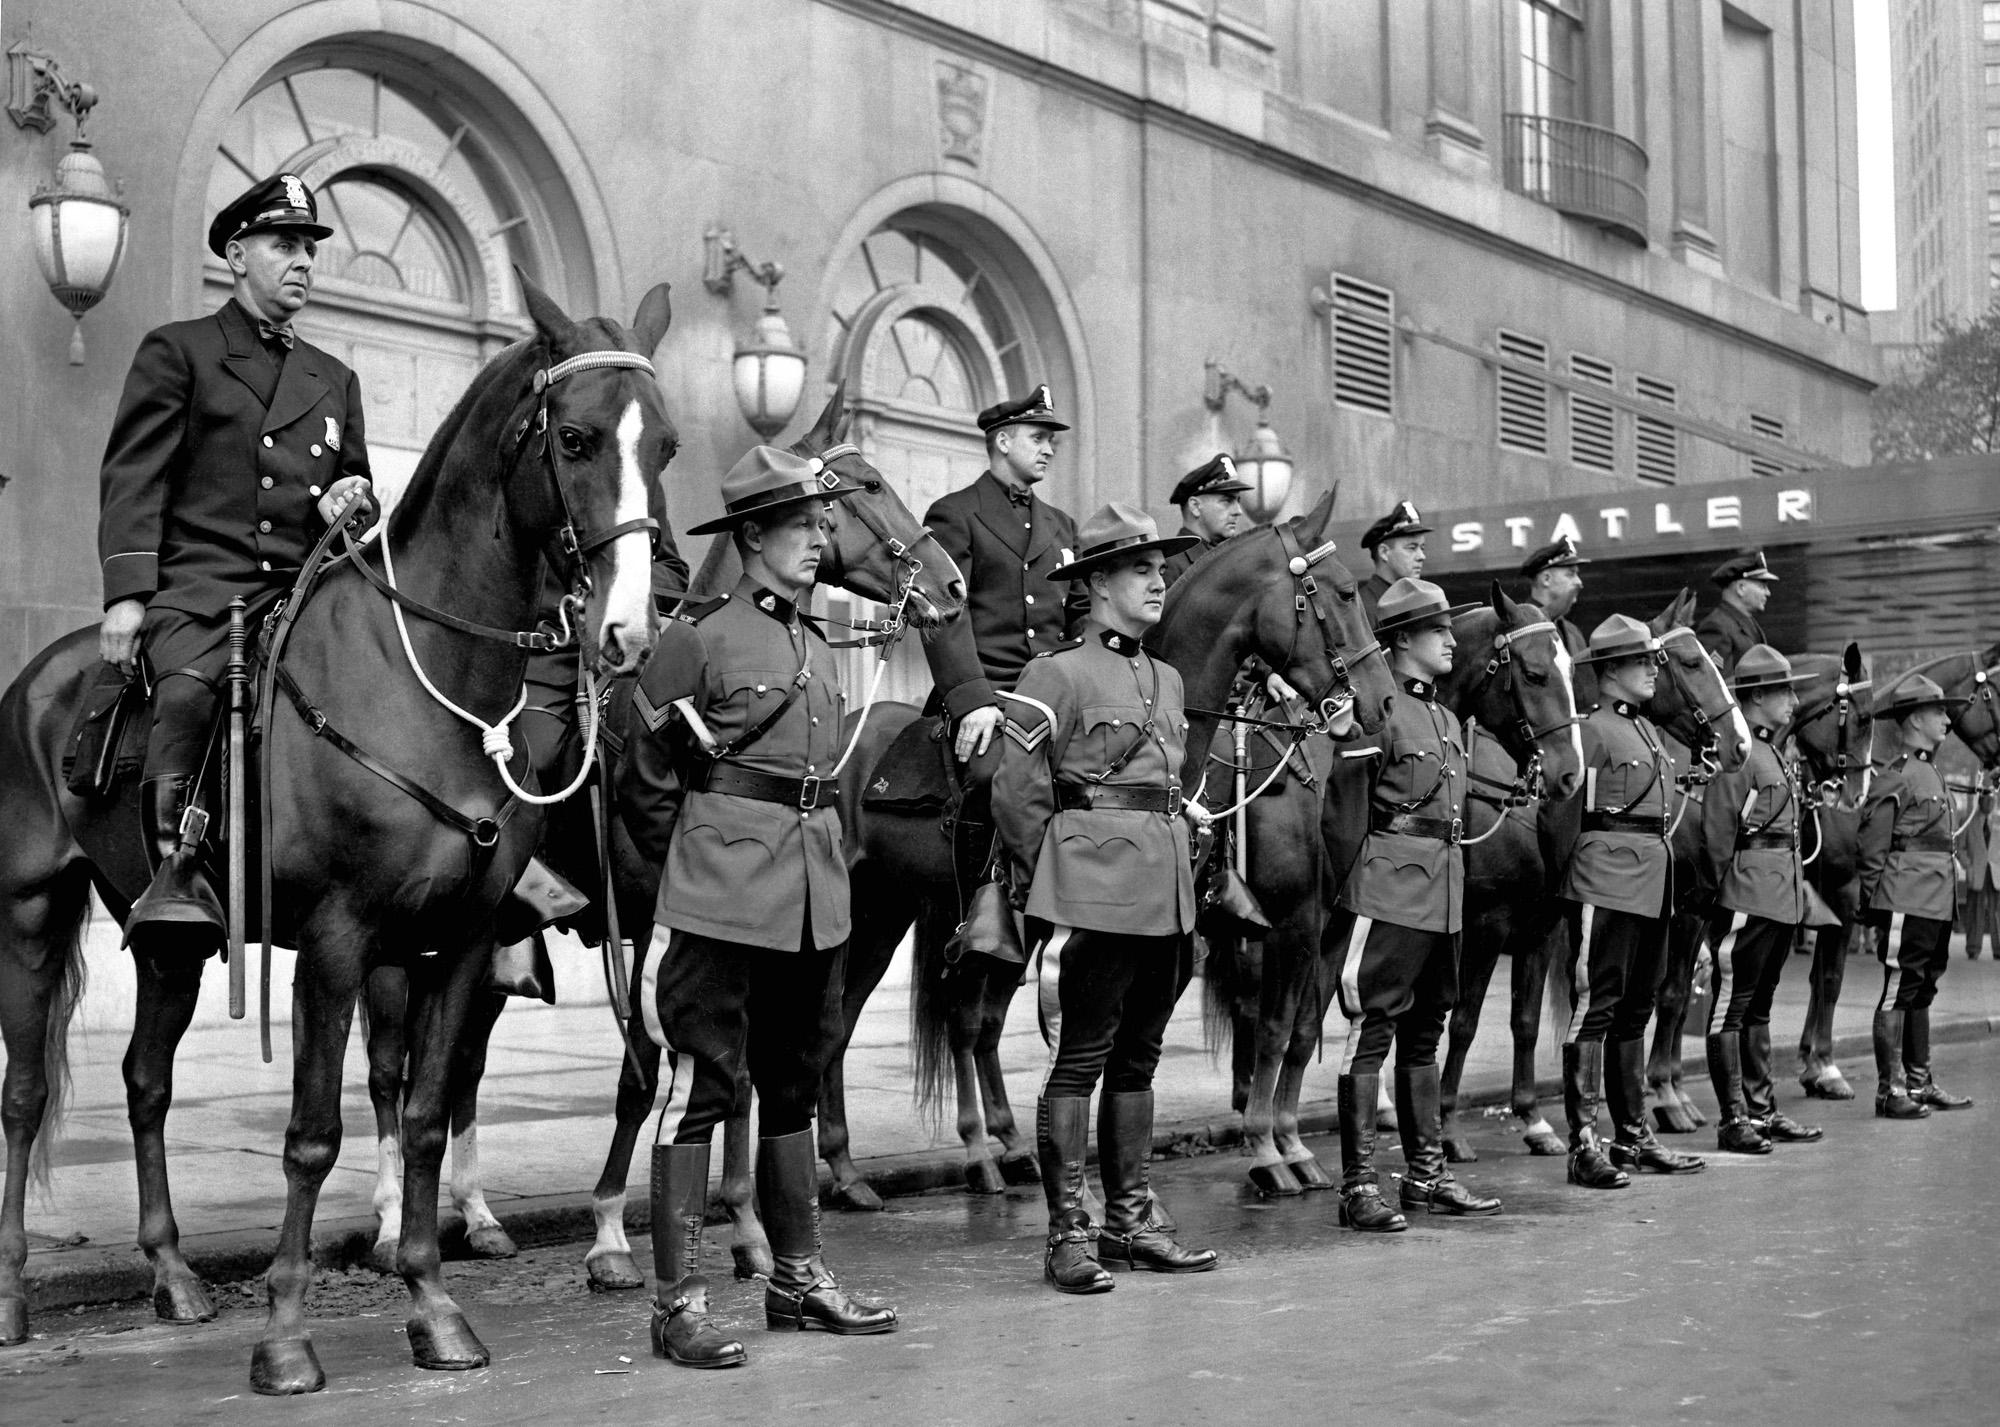 On July 24, 1951, the city of Detroit celebrated its 250th anniversary. To honor the occasion, a number of special events were held. This photo, shot by my grandfather, Howard McGraw of the Detroit News, depicts the Detroit police on horseback with the RCMP (Royal Canadian Mounted Police) standing in front, likely part of a parade.  Both groups stand in front of the old Statler hotel (since demolished)  located on Washington Blvd, near Grand Circus Park in downtown Detroit. View full size.